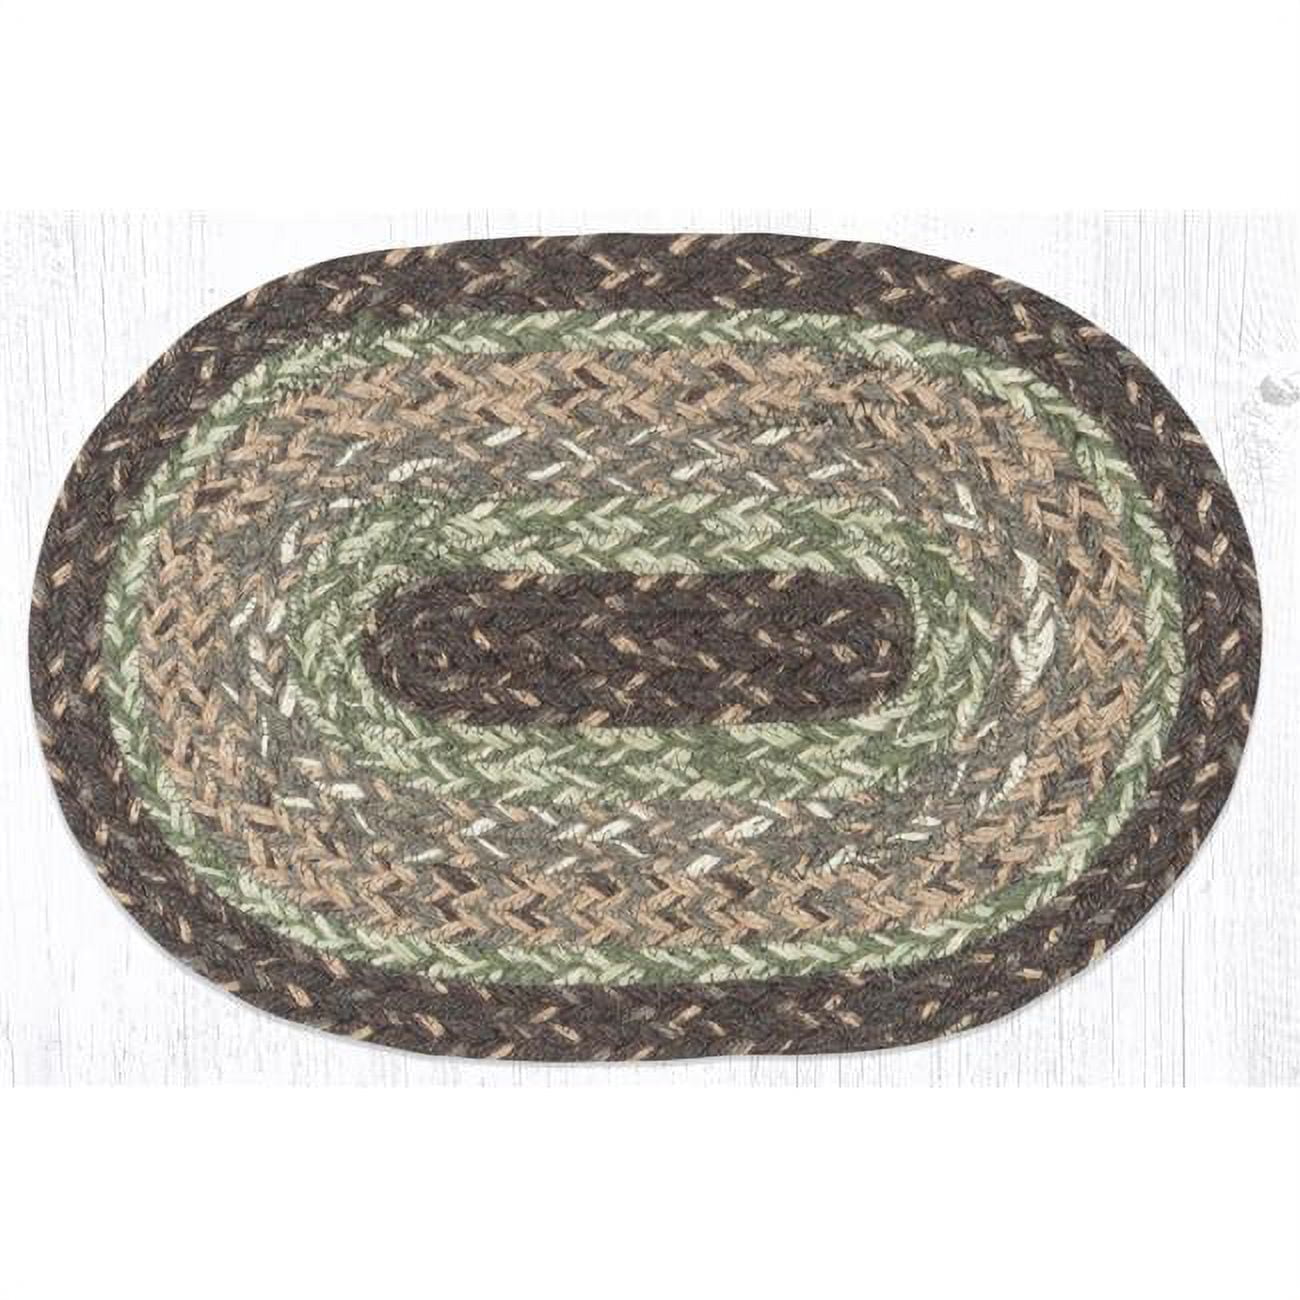 Capitol Importing 00-9-110 10 X 15 In. Ms 9-110 Moss Bark Oval Swatch